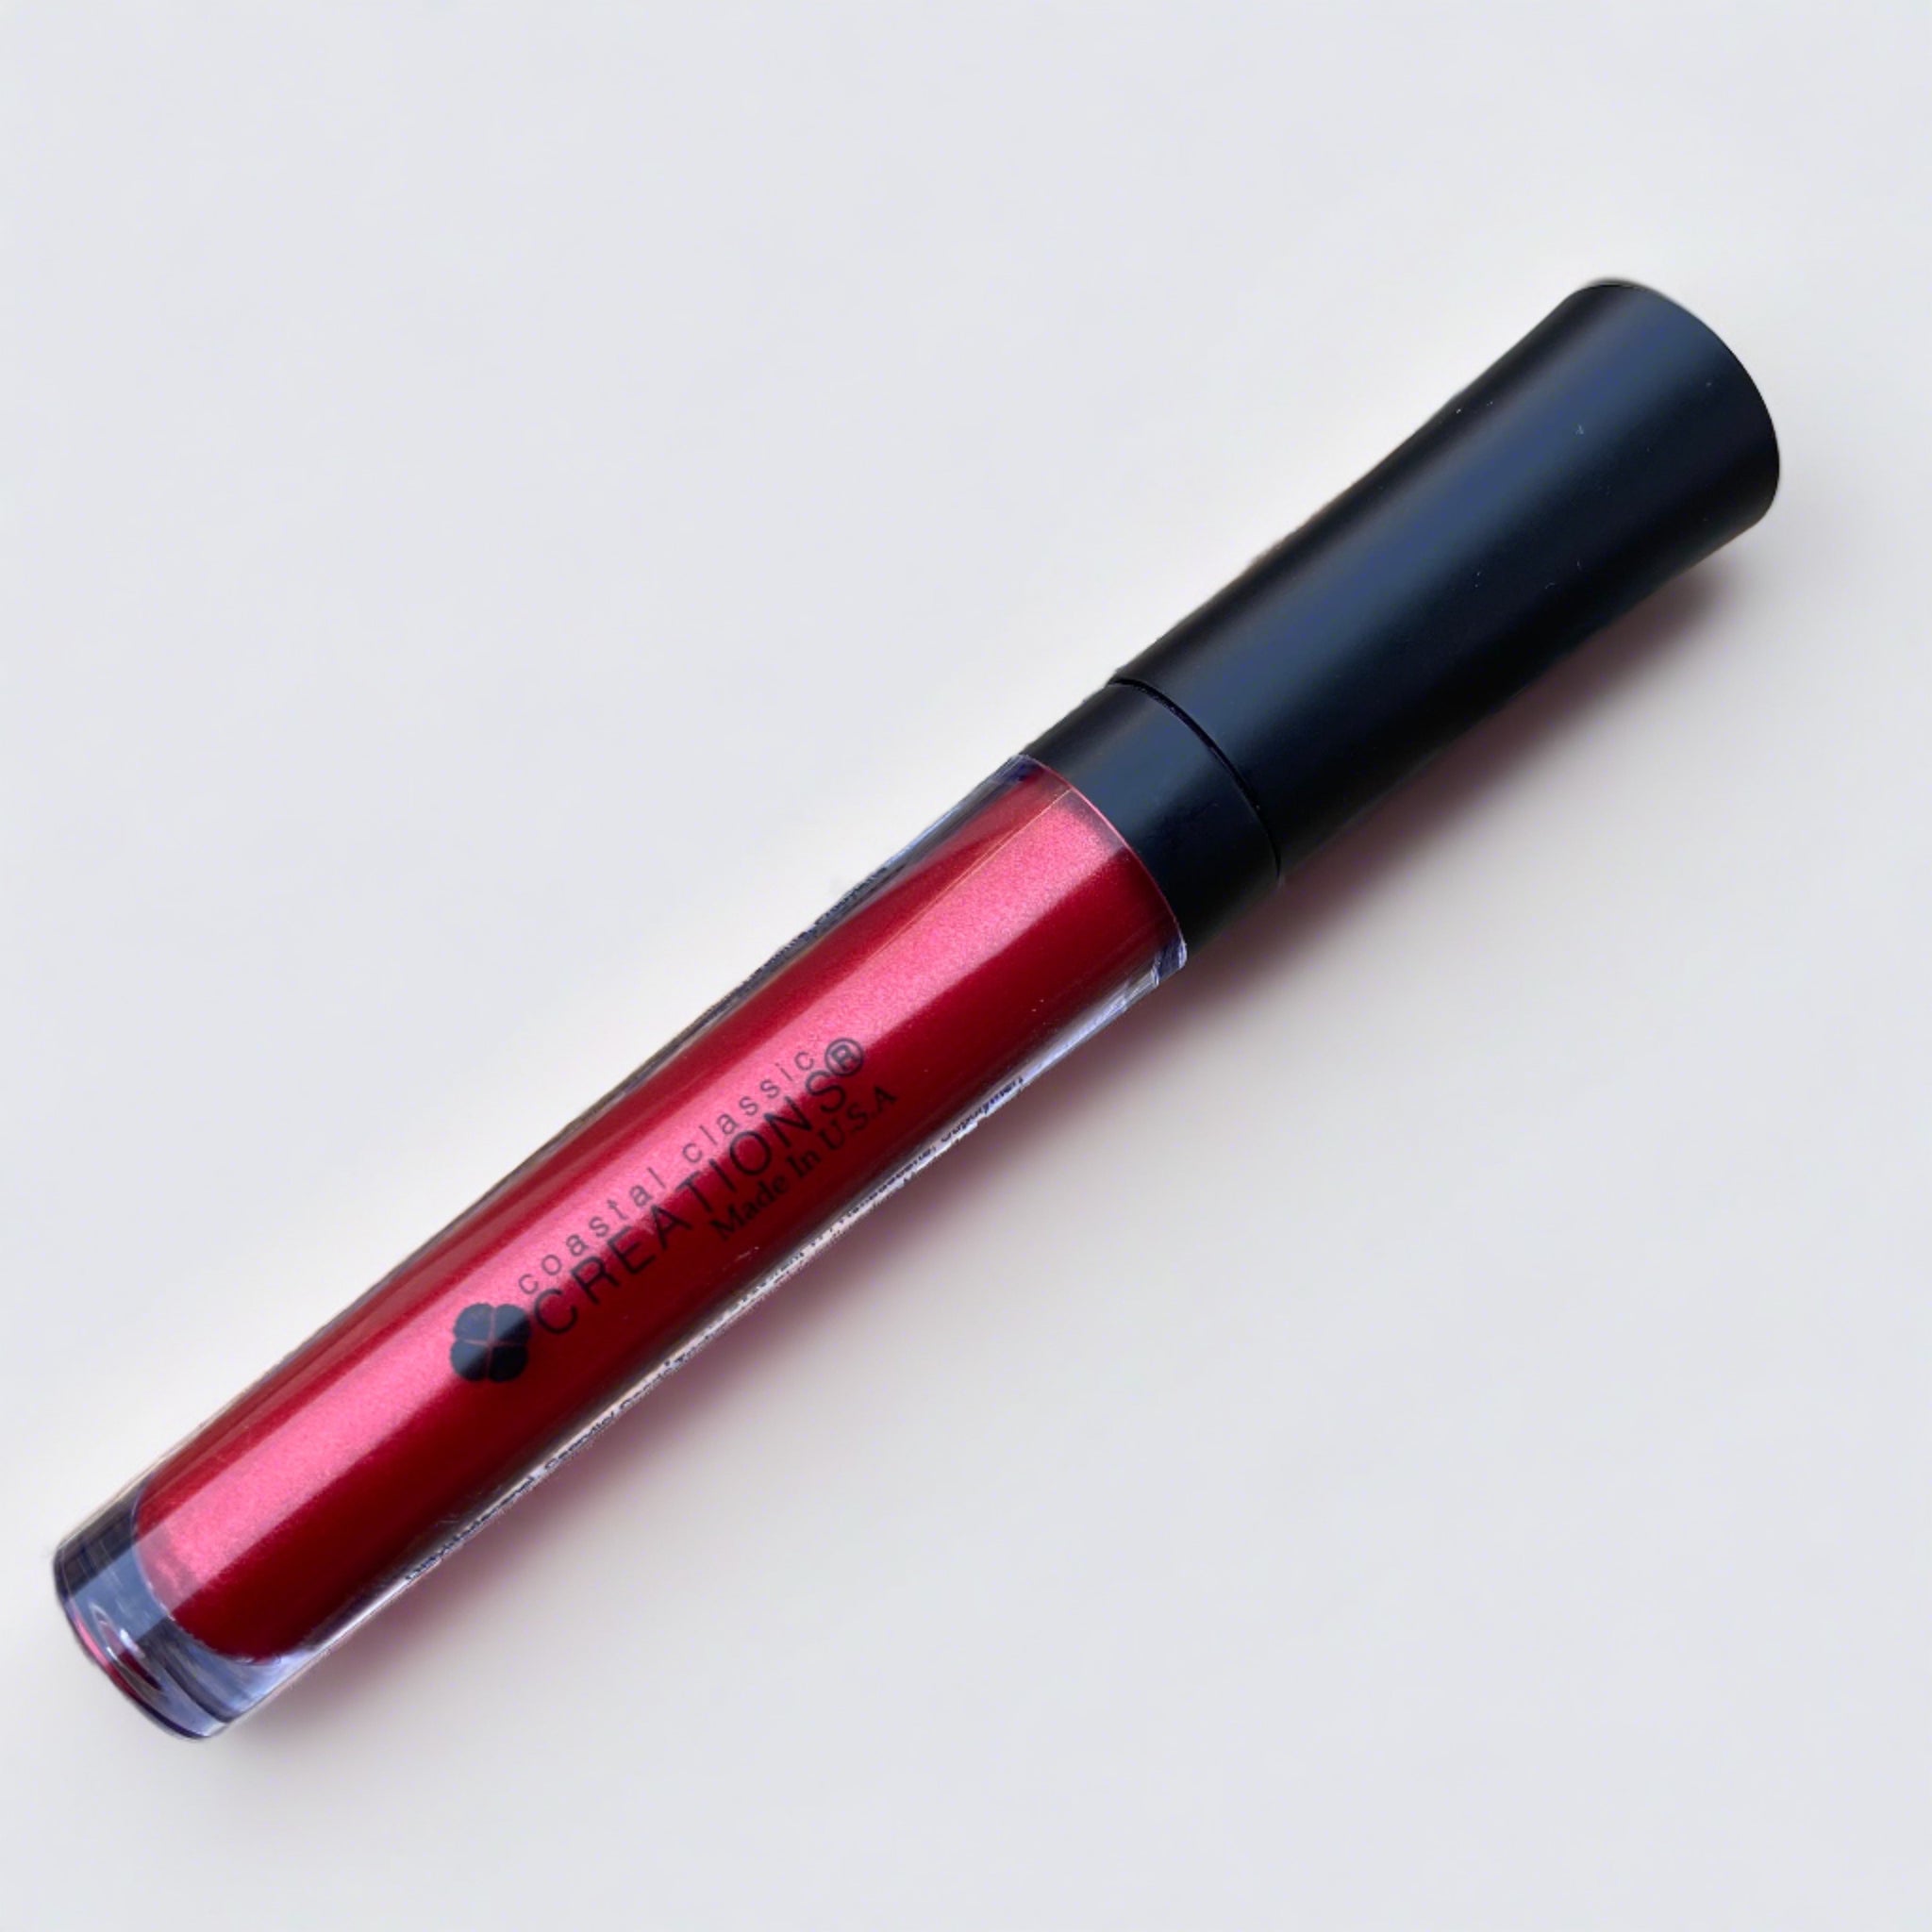 Relentless Red Liquid Metal Lipstick for a bold lip color